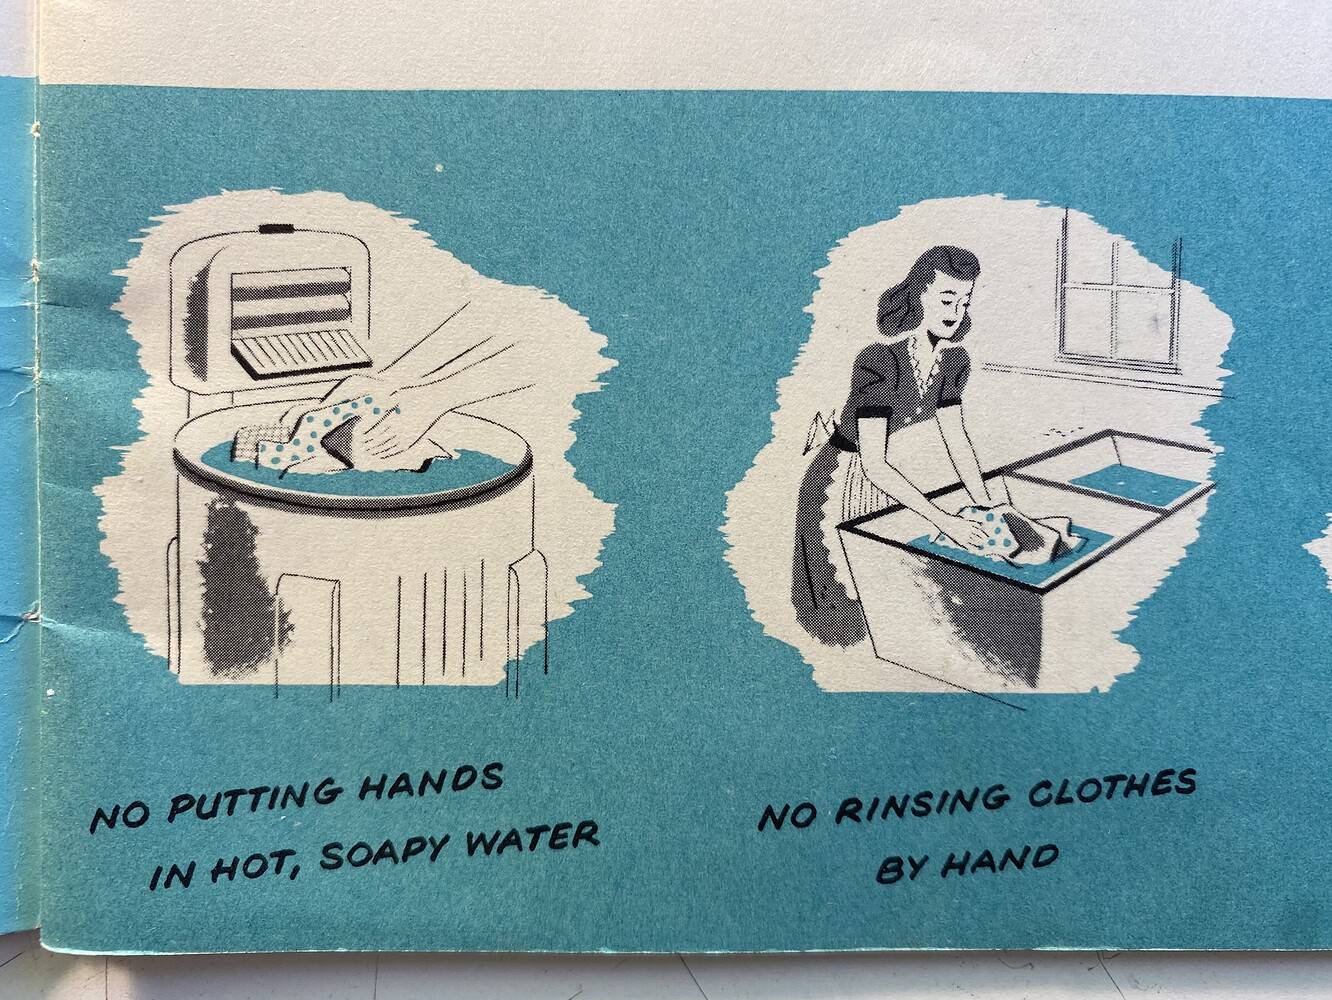 Spot illustrations from a Mid-Century washing machine brochure. There are two images, one a close up of a pair of hands holding clothing inside a washing machine and the other featuring a woman washing laundry in a sink. The illustrations are primarily black and white with blue accents for the water.